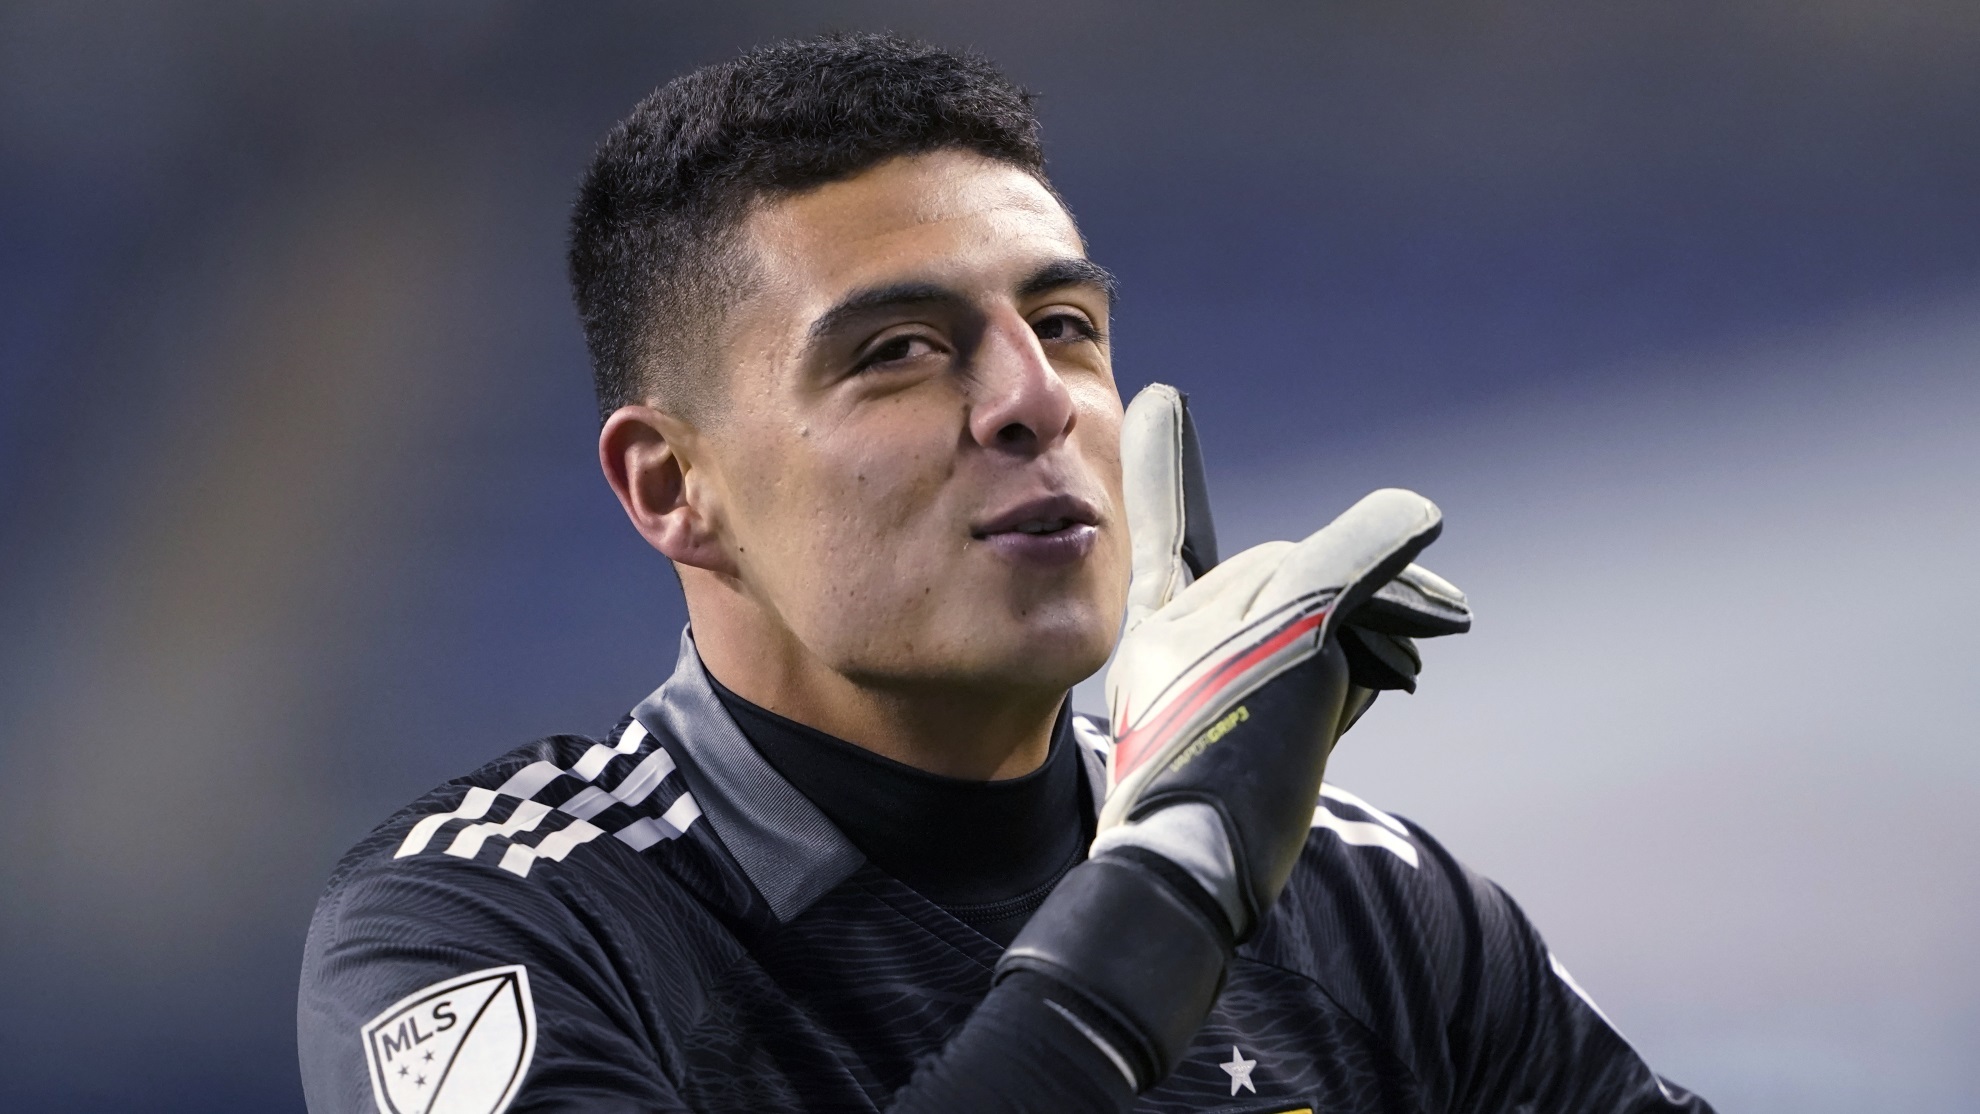 Real Salt Lake goalkeeper David Ochoa motions to fans in a gesture to quiet.